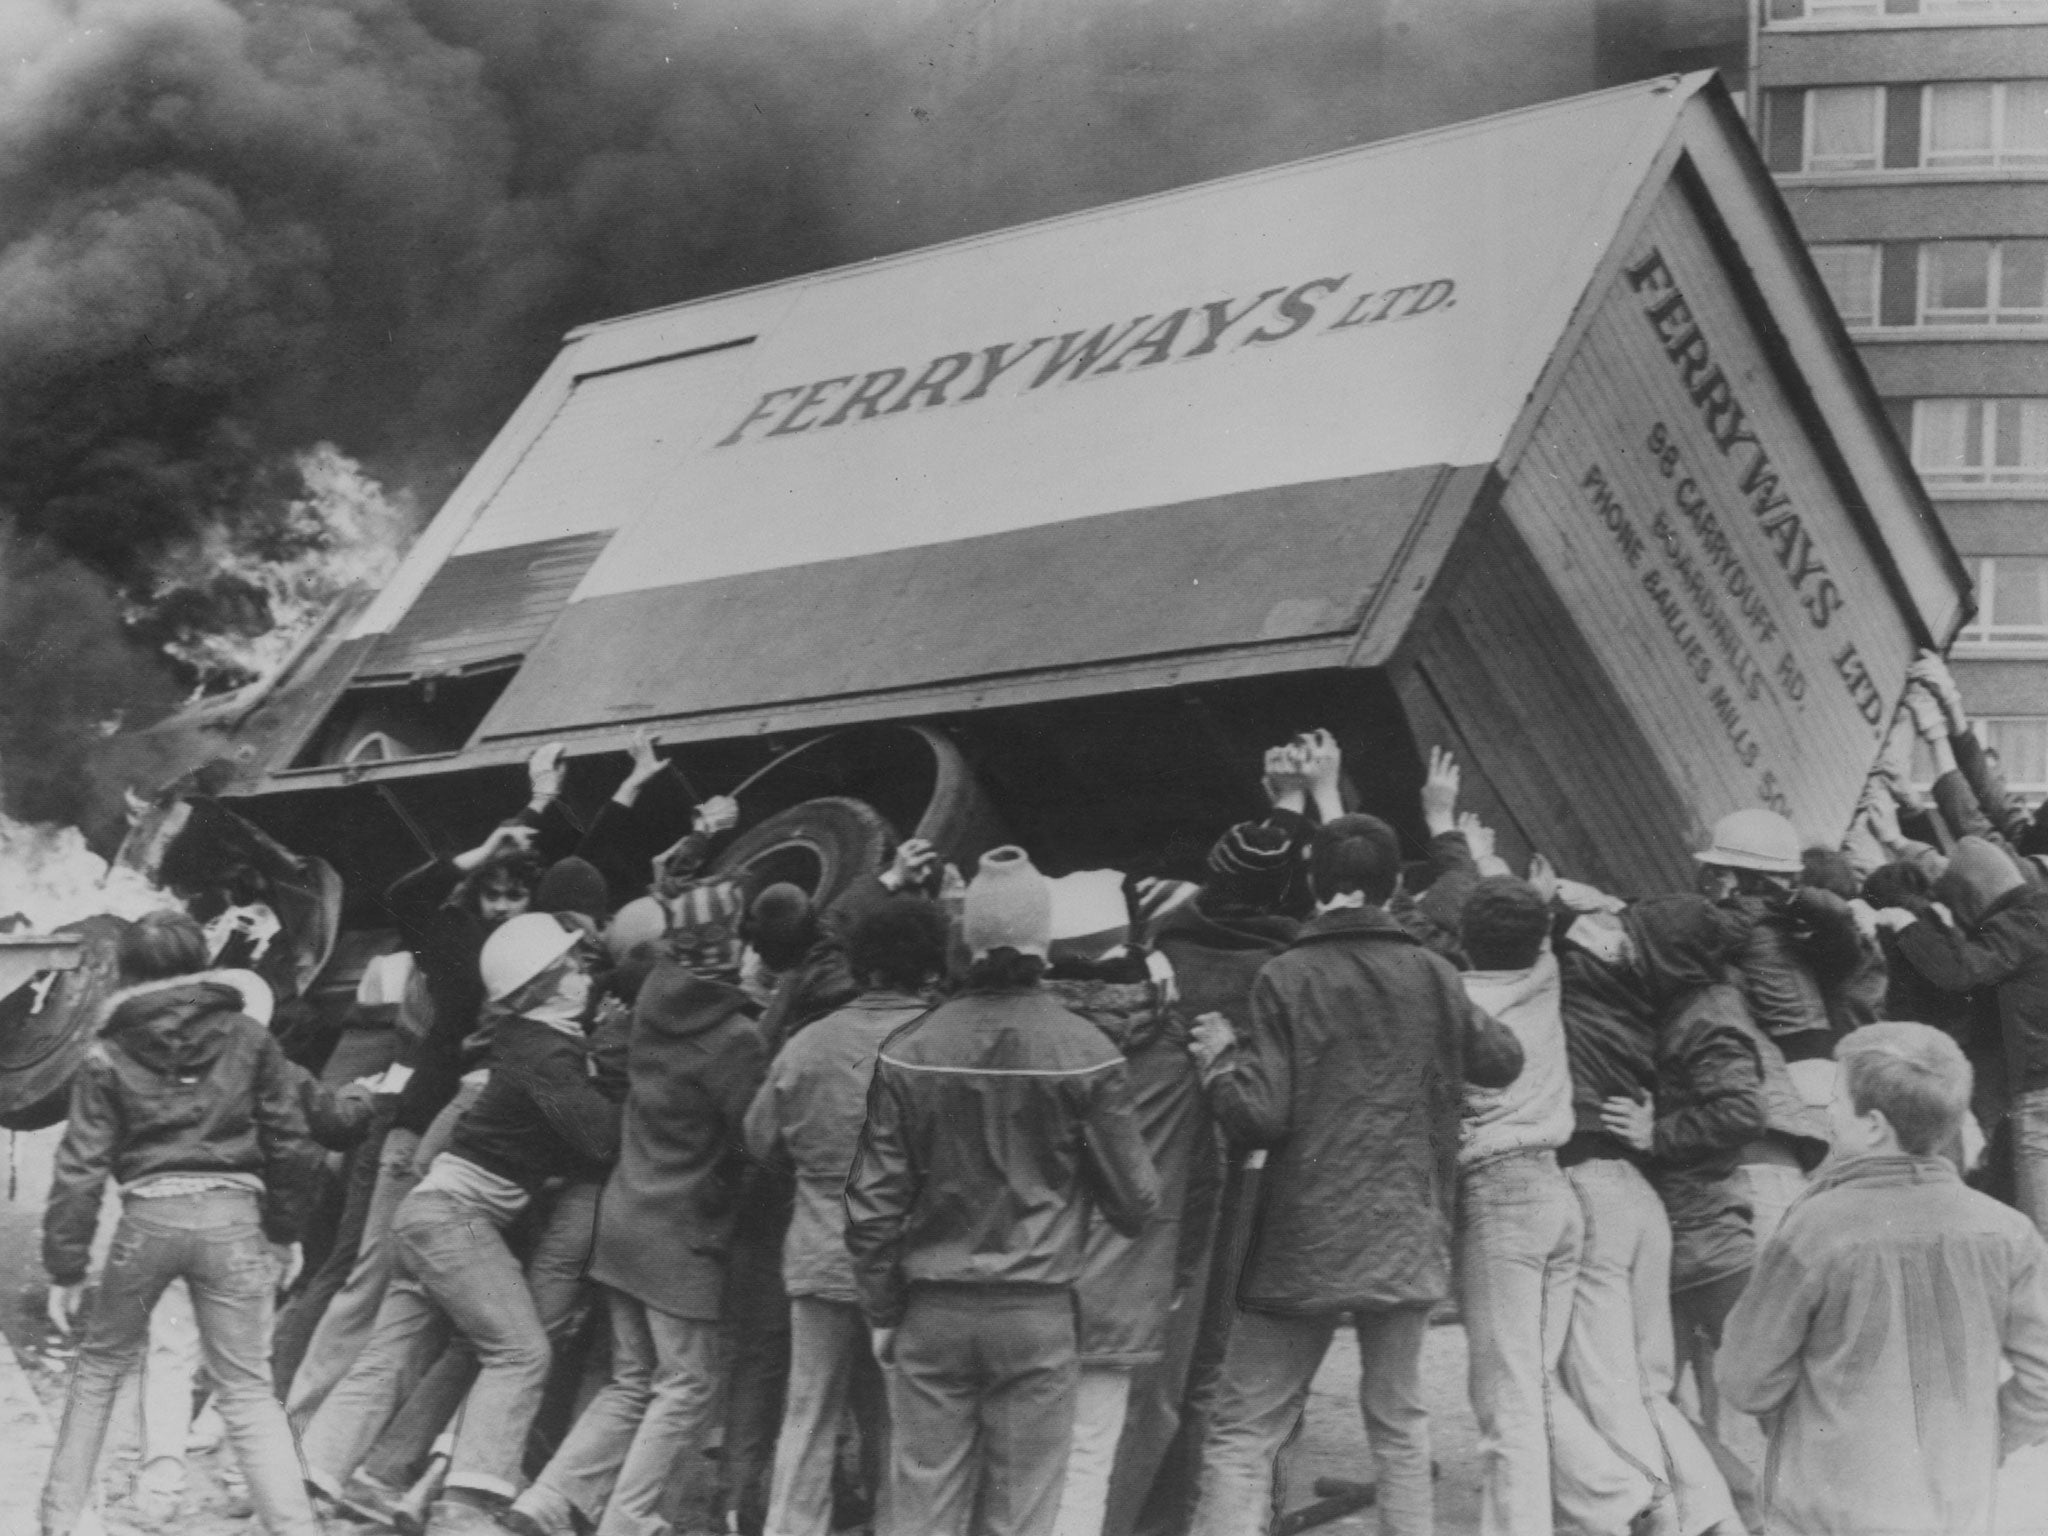 Rioters turn a burning lorry into a barricade in the Divis Flats area of Belfast during The Troubles